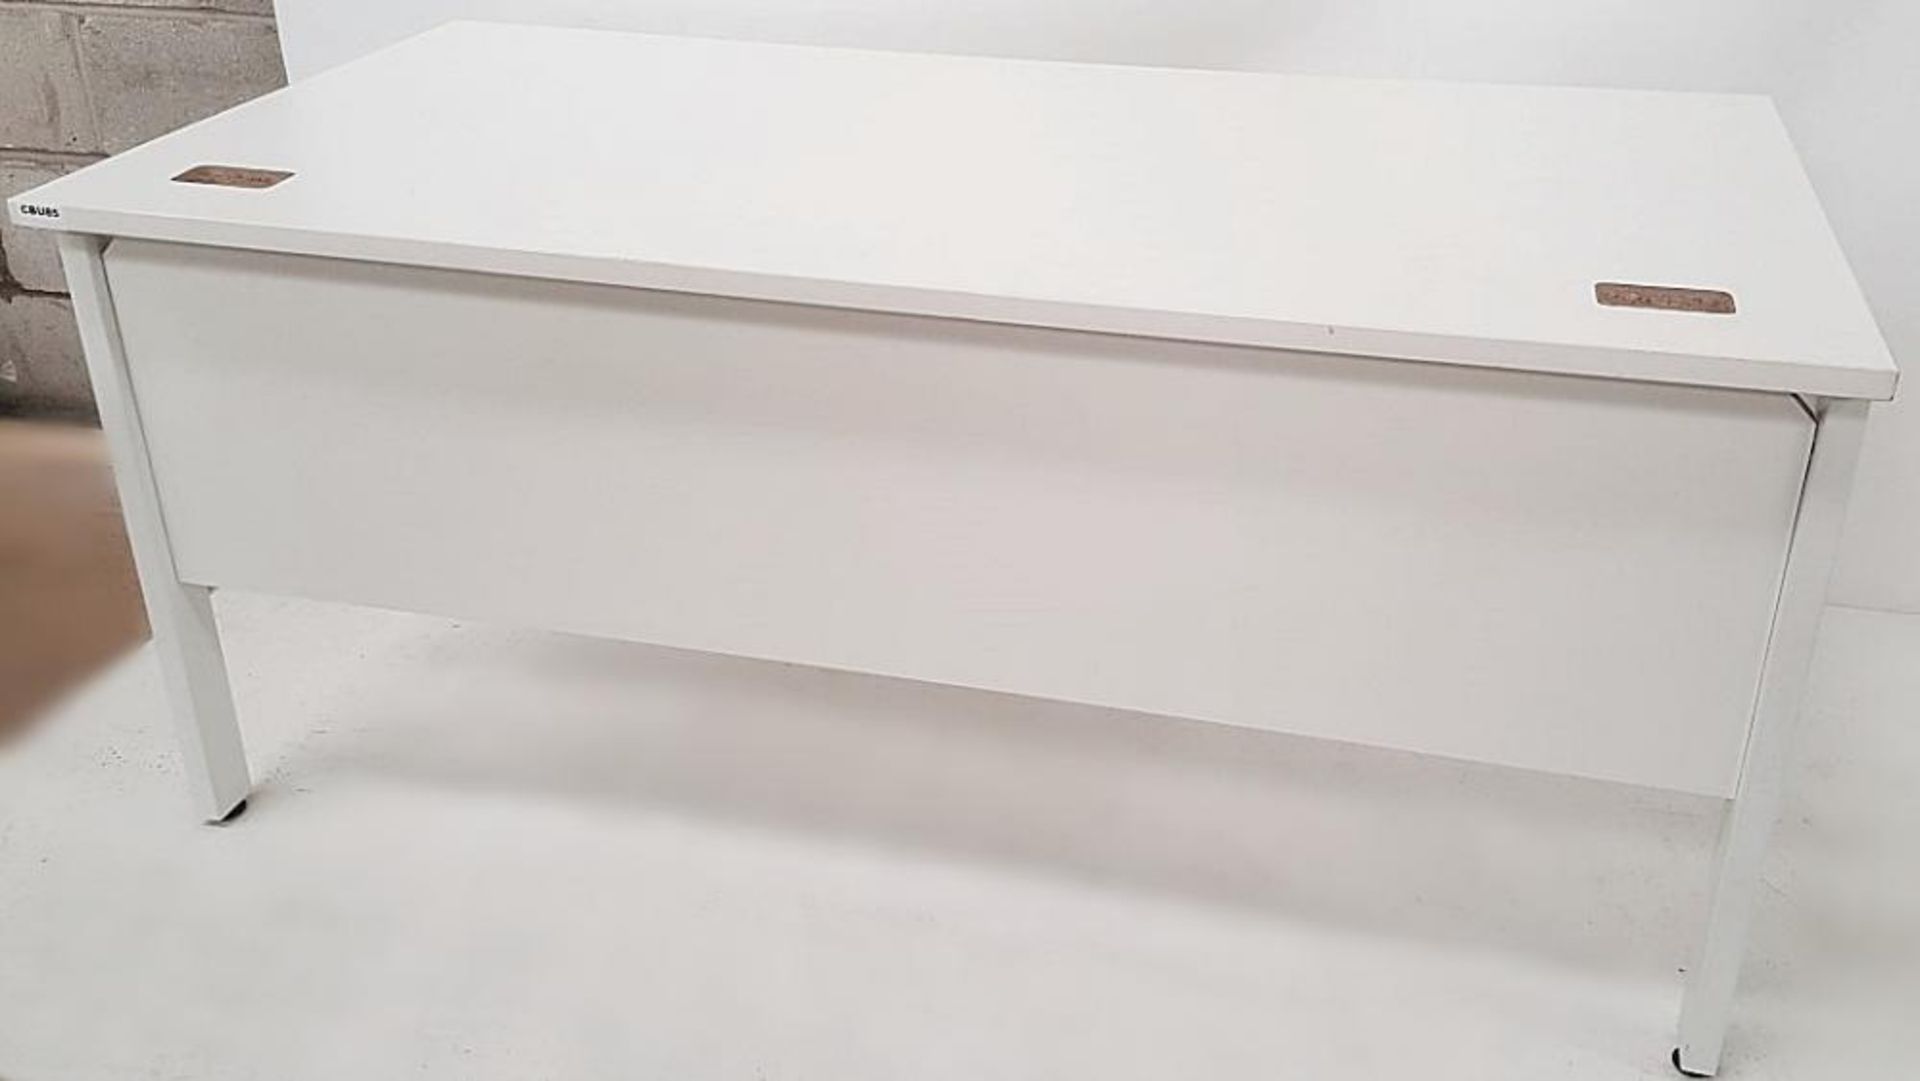 1 x Large Premium Office Desk In White - Used, In Good Condition - Dimensions: W160 x W80 x H74cm - - Image 2 of 5